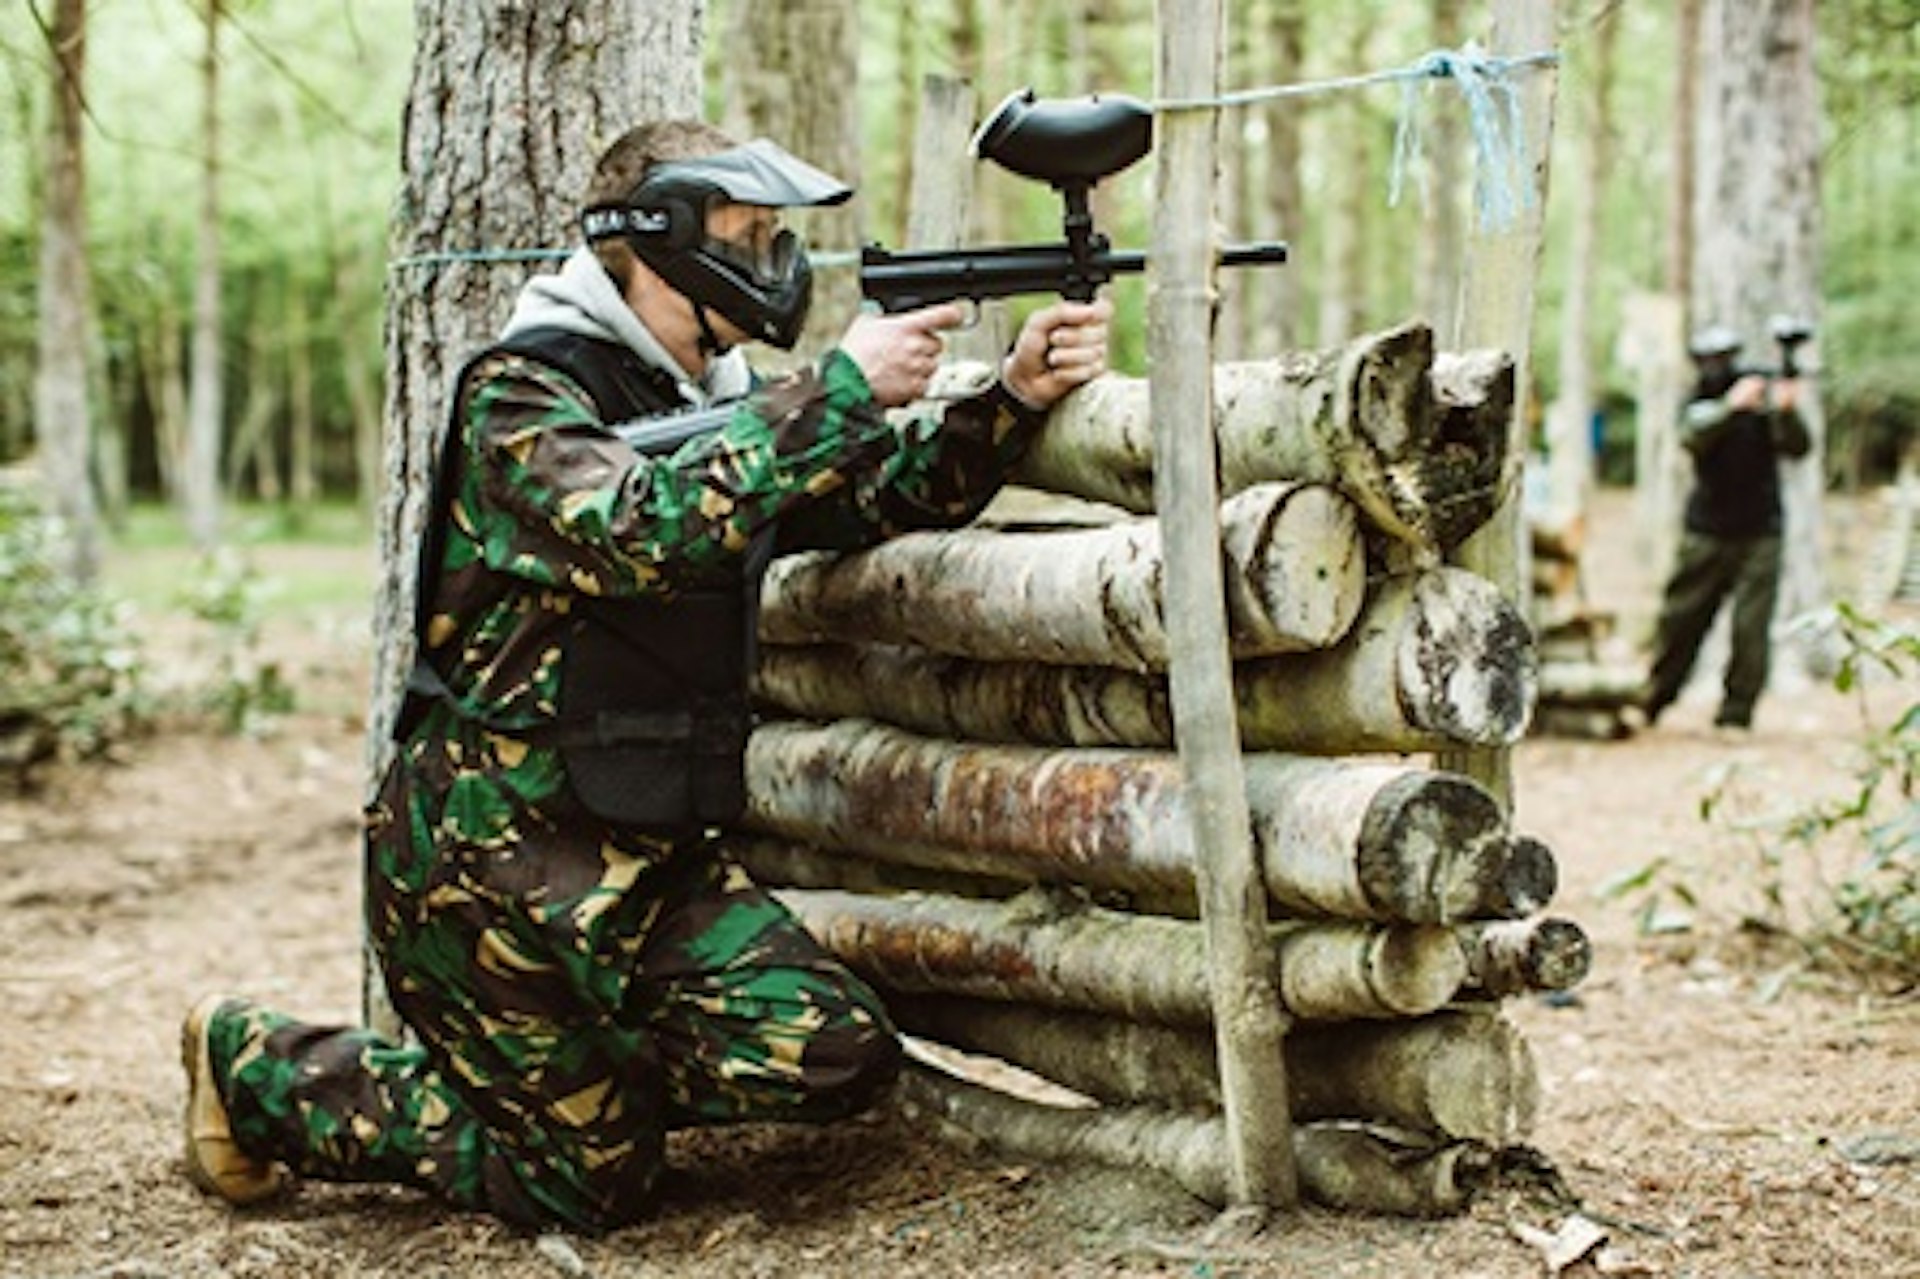 Full Day Paintballing for Two 3